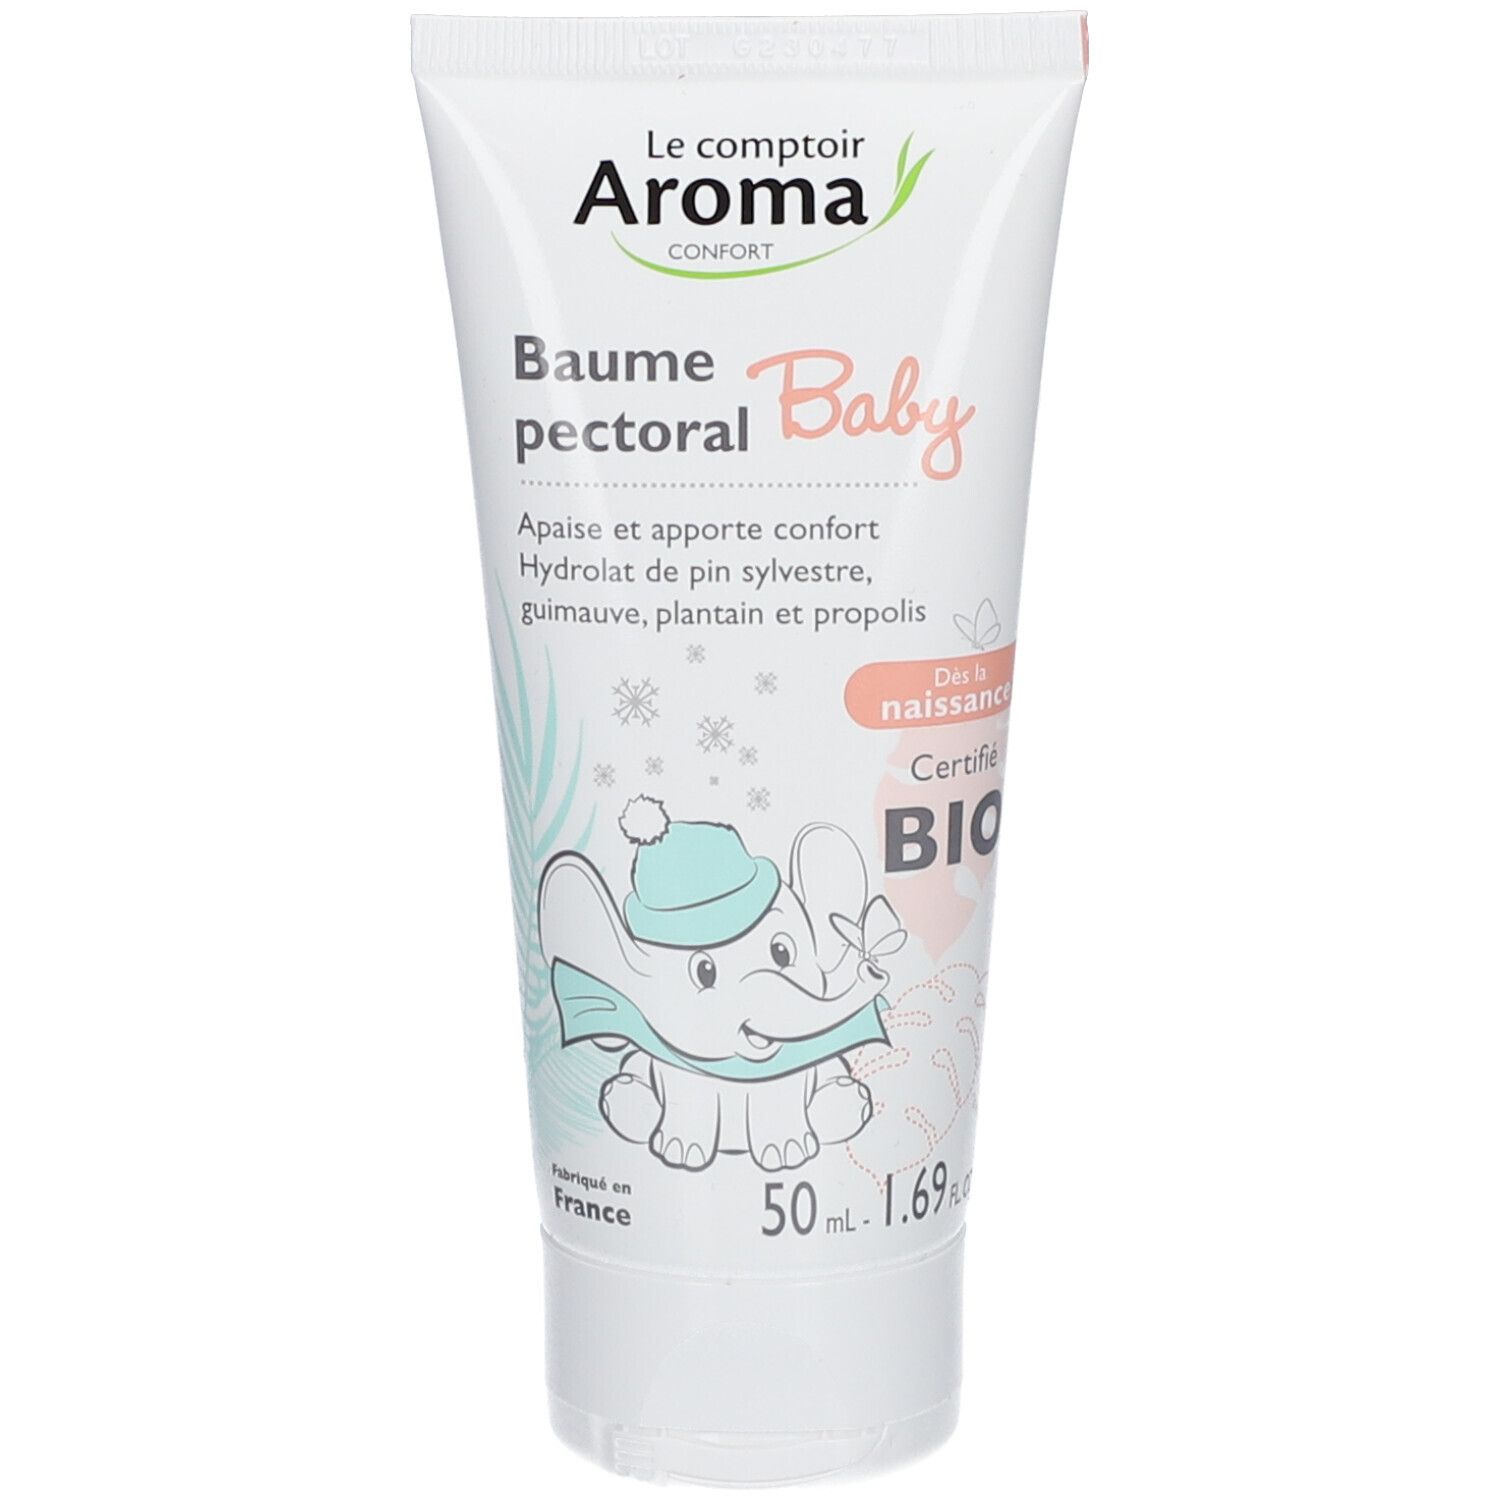 Le Comptoir Aroma Confort Baume Pectoral Baby